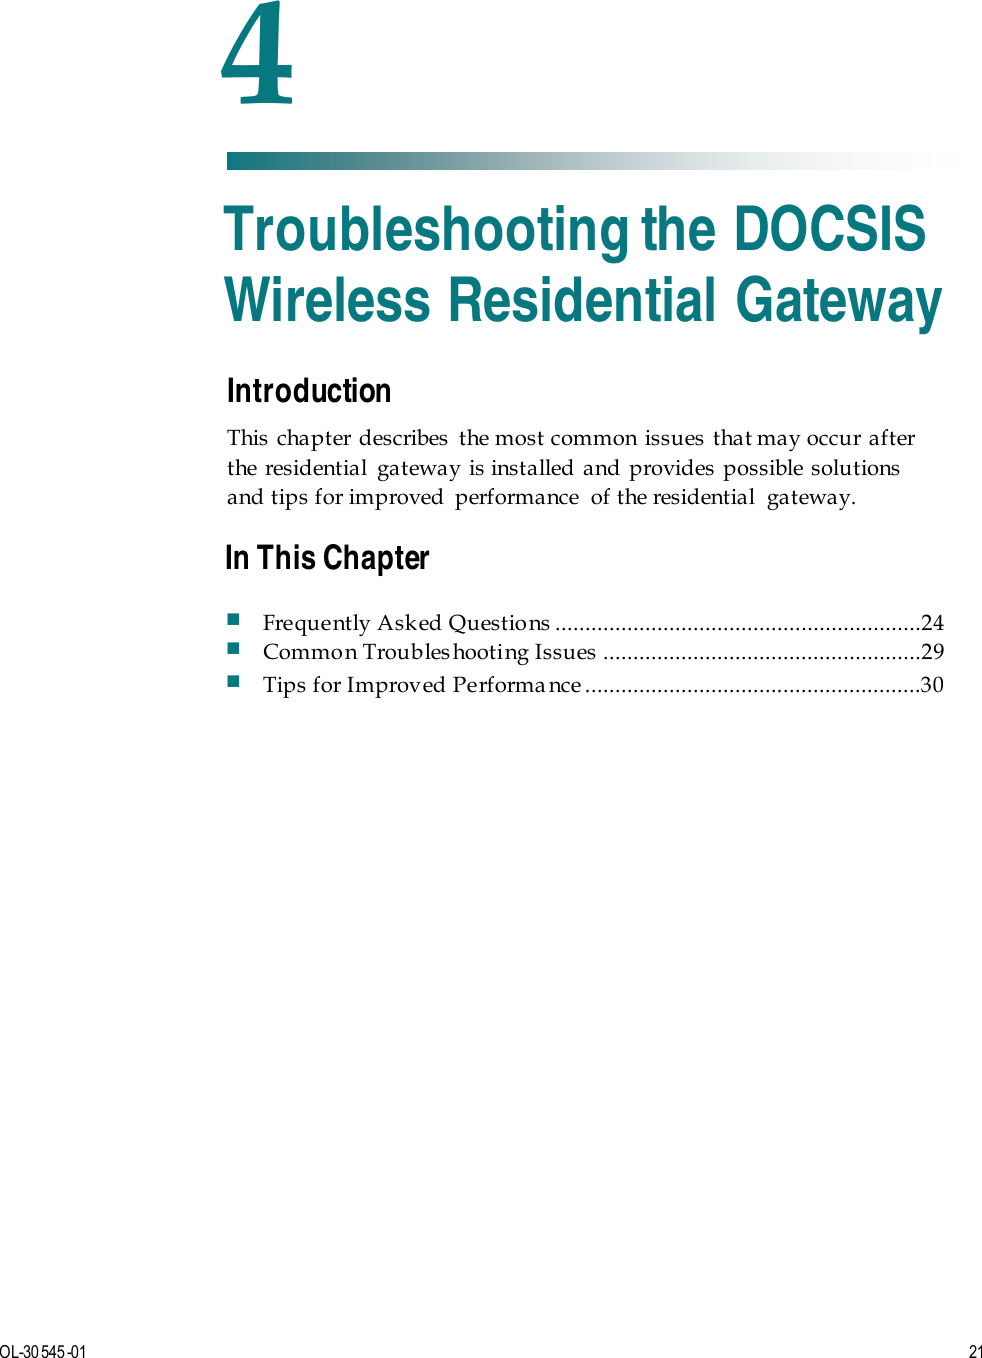   OL-30 545-01  21  Introduction This chapter describes the most common issues that may occur after the residential gateway is installed and provides possible solutions and tips for improved  performance  of the residential  gateway.    4 Chapter 4 Troubleshooting the DOCSIS Wireless Residential Gateway In This Chapter  Frequently Ask ed Questio ns  .............................................................24  Common Troubleshooting Issues .....................................................29  Tips for Improved Performa nce ........................................................30 